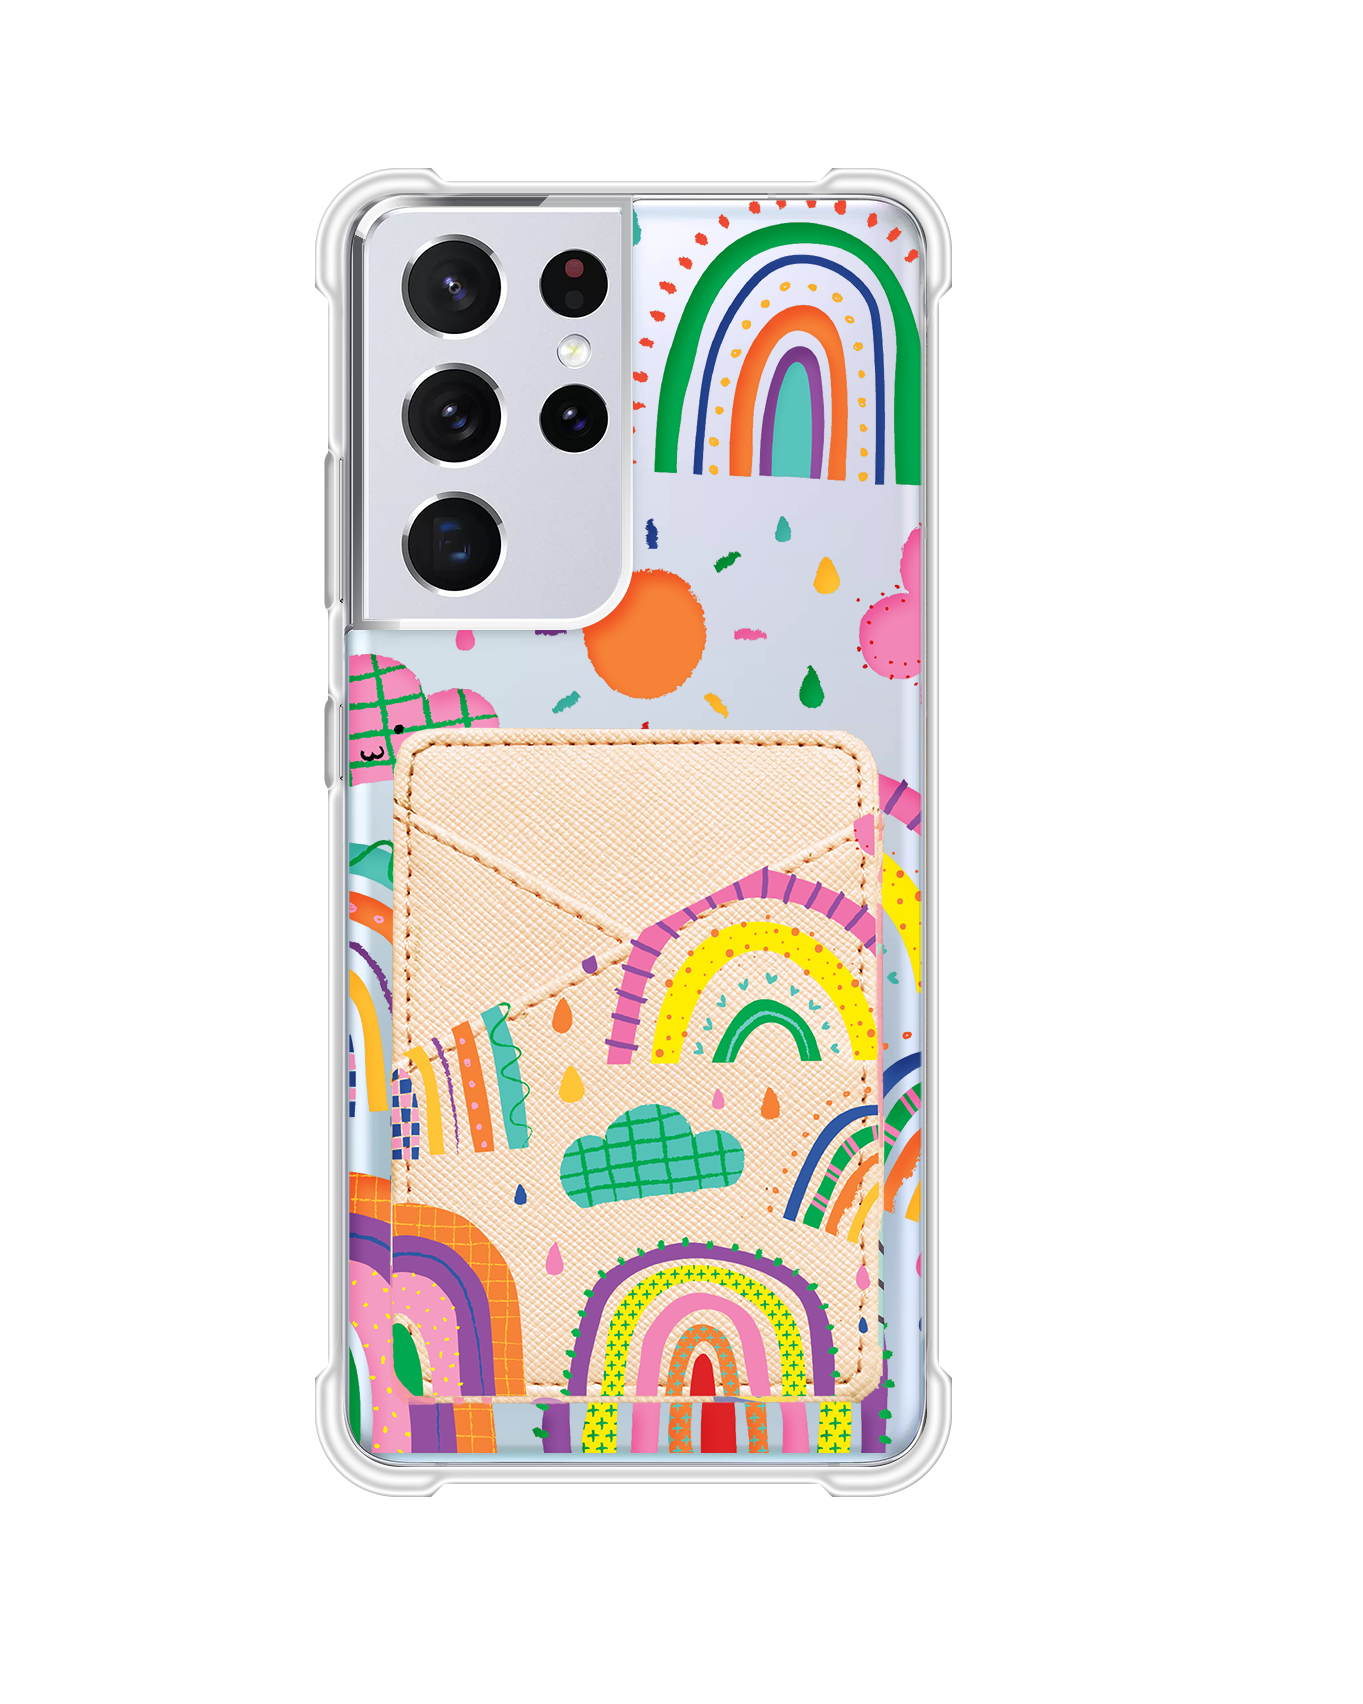 Android Phone Wallet Case - Rainbow 2.0